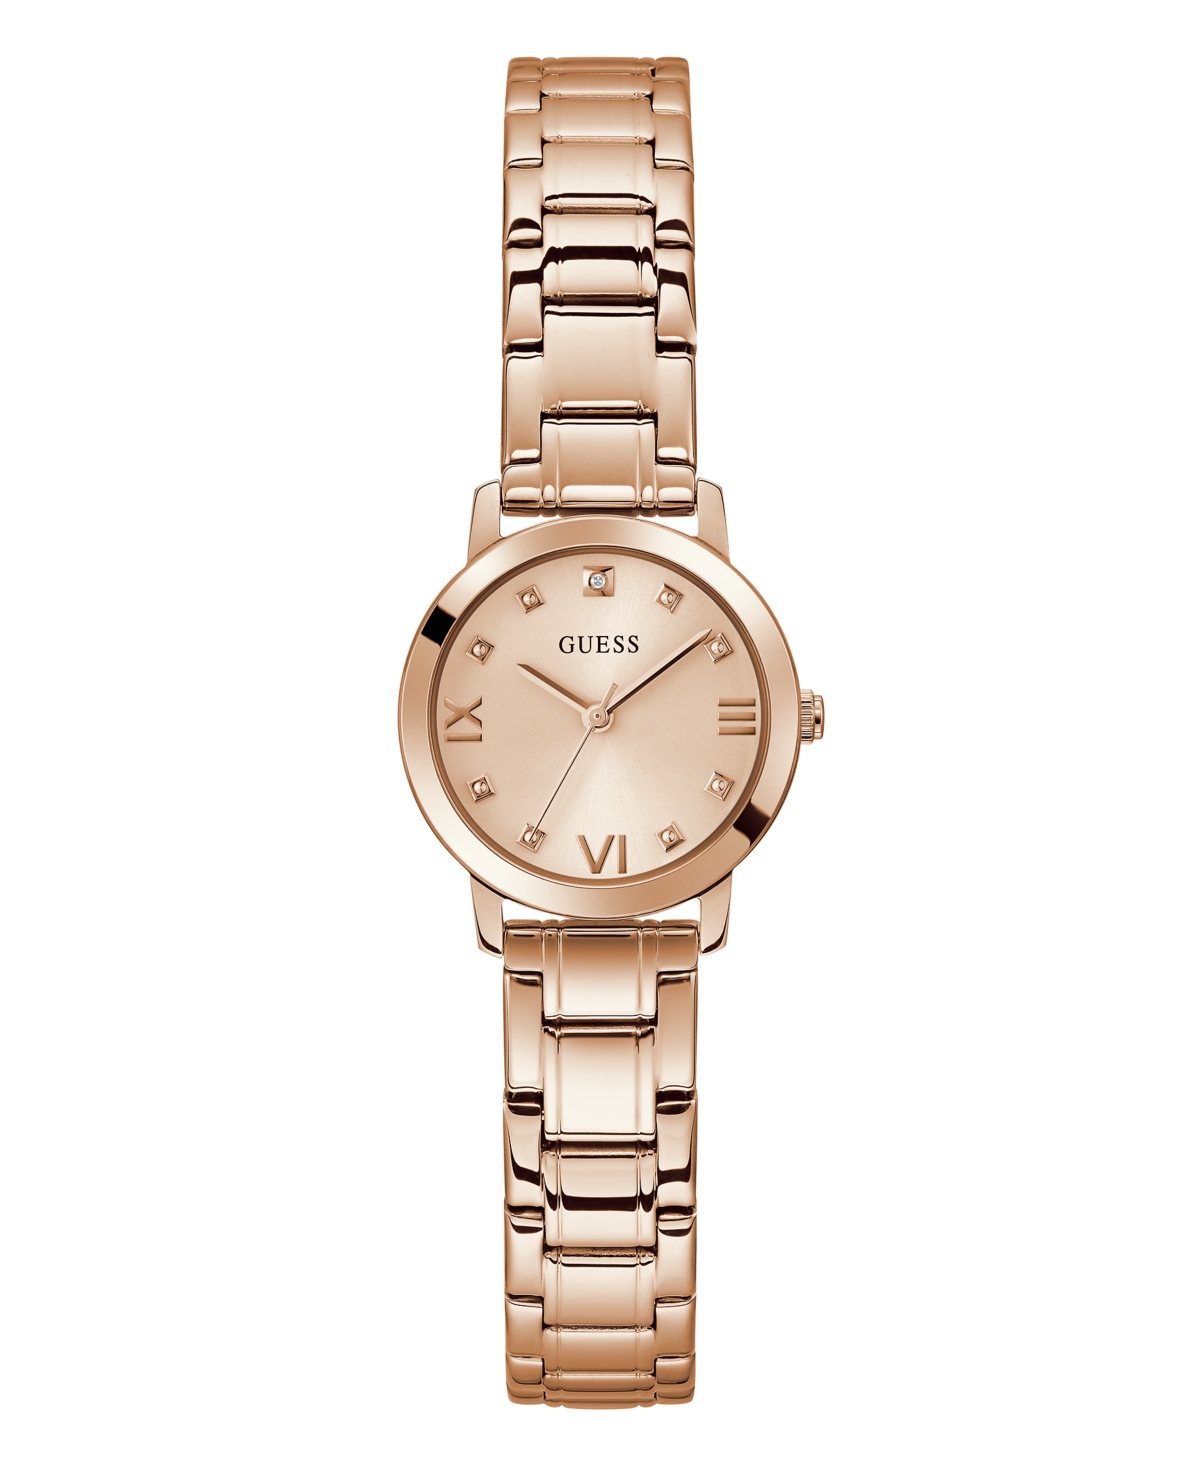 Guess Women's Three-hand Rose Gold-tone Stainless Steel Watch 28mm